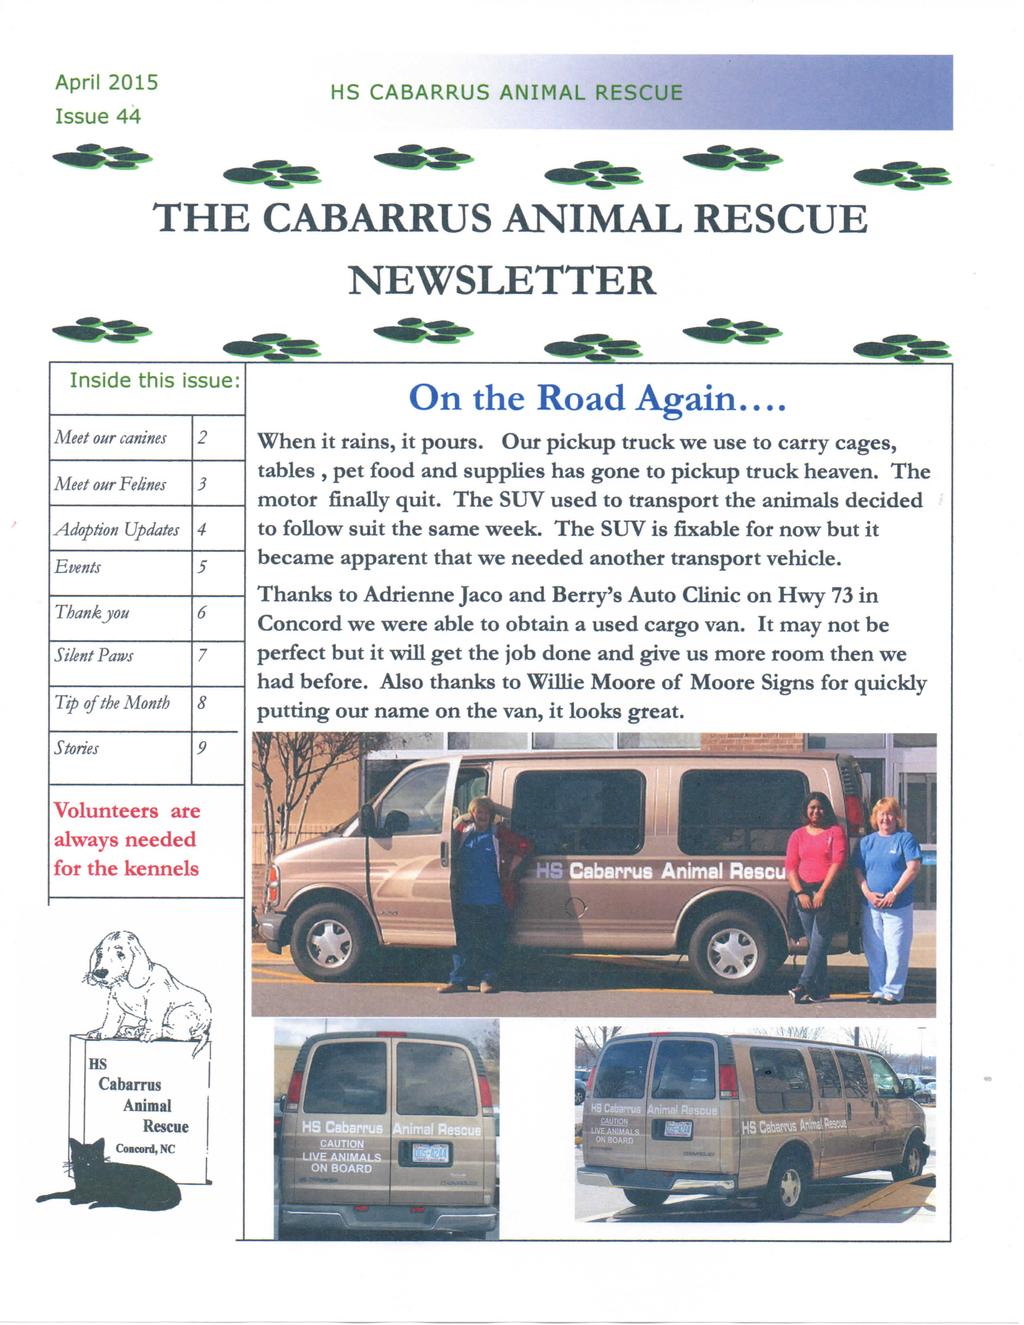 April 2015 Issue 44 HS CABARRUS ANIMAL RESCUE THE CABARRUS ANIMAL RESCUE NEWSLETTER Inside this issue: Meet our canines 2 Meet our Felines 3 Adoption Updates 4 Events 5 Thankjou 6 Silent Paws 7 Tip